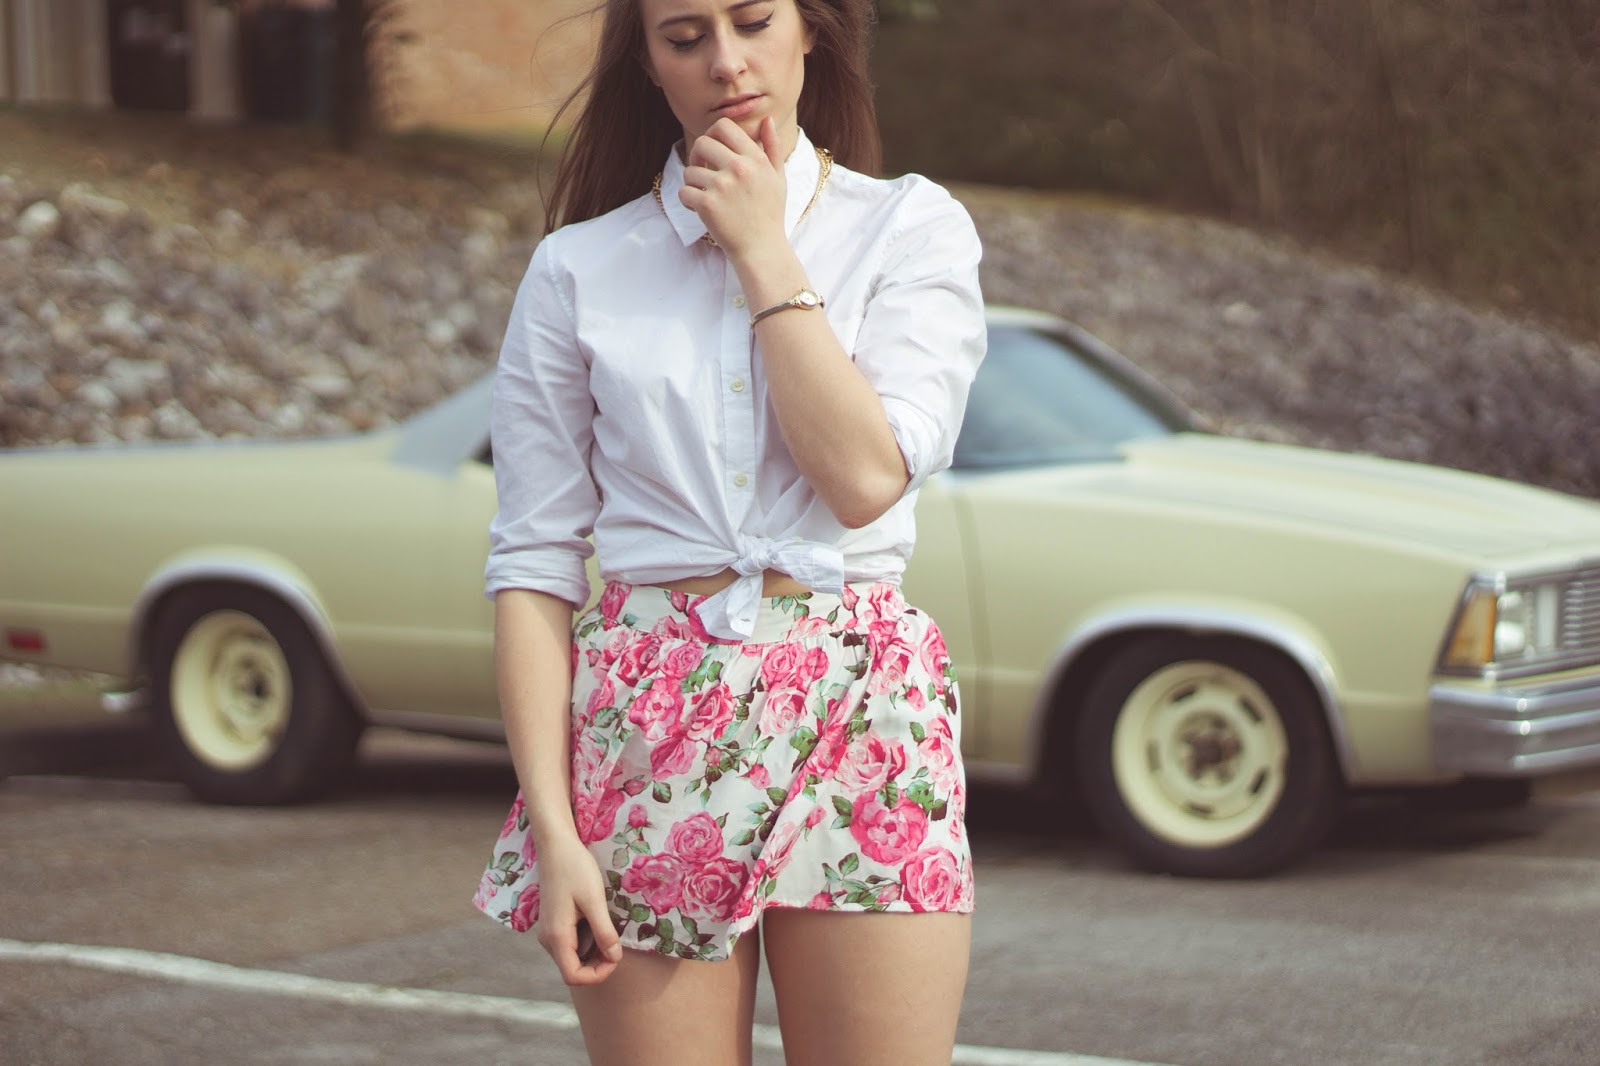 Vintage Inspired Outfit, lana del rey style, retro style, outfit, fashion blogger, feminine, femme fatale,forever 21 floral skort, gap white button up, el camino, film blogger, movies, style